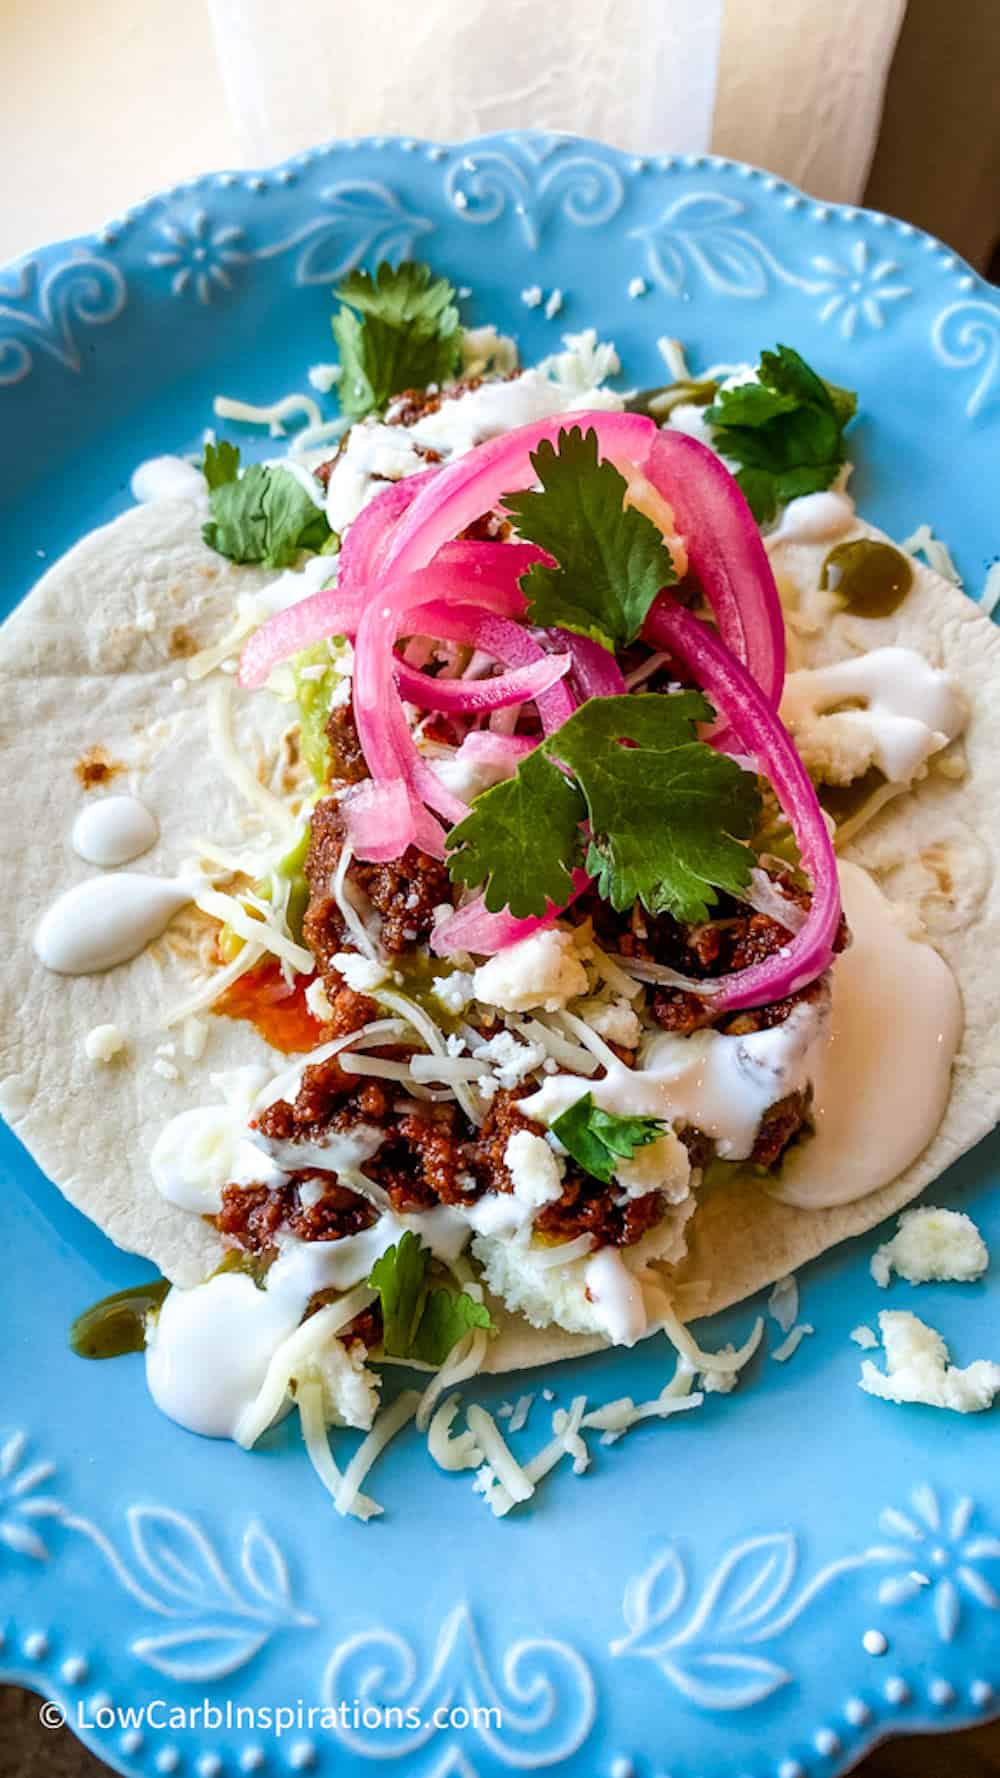 Taco topped with red onions on a blue plate